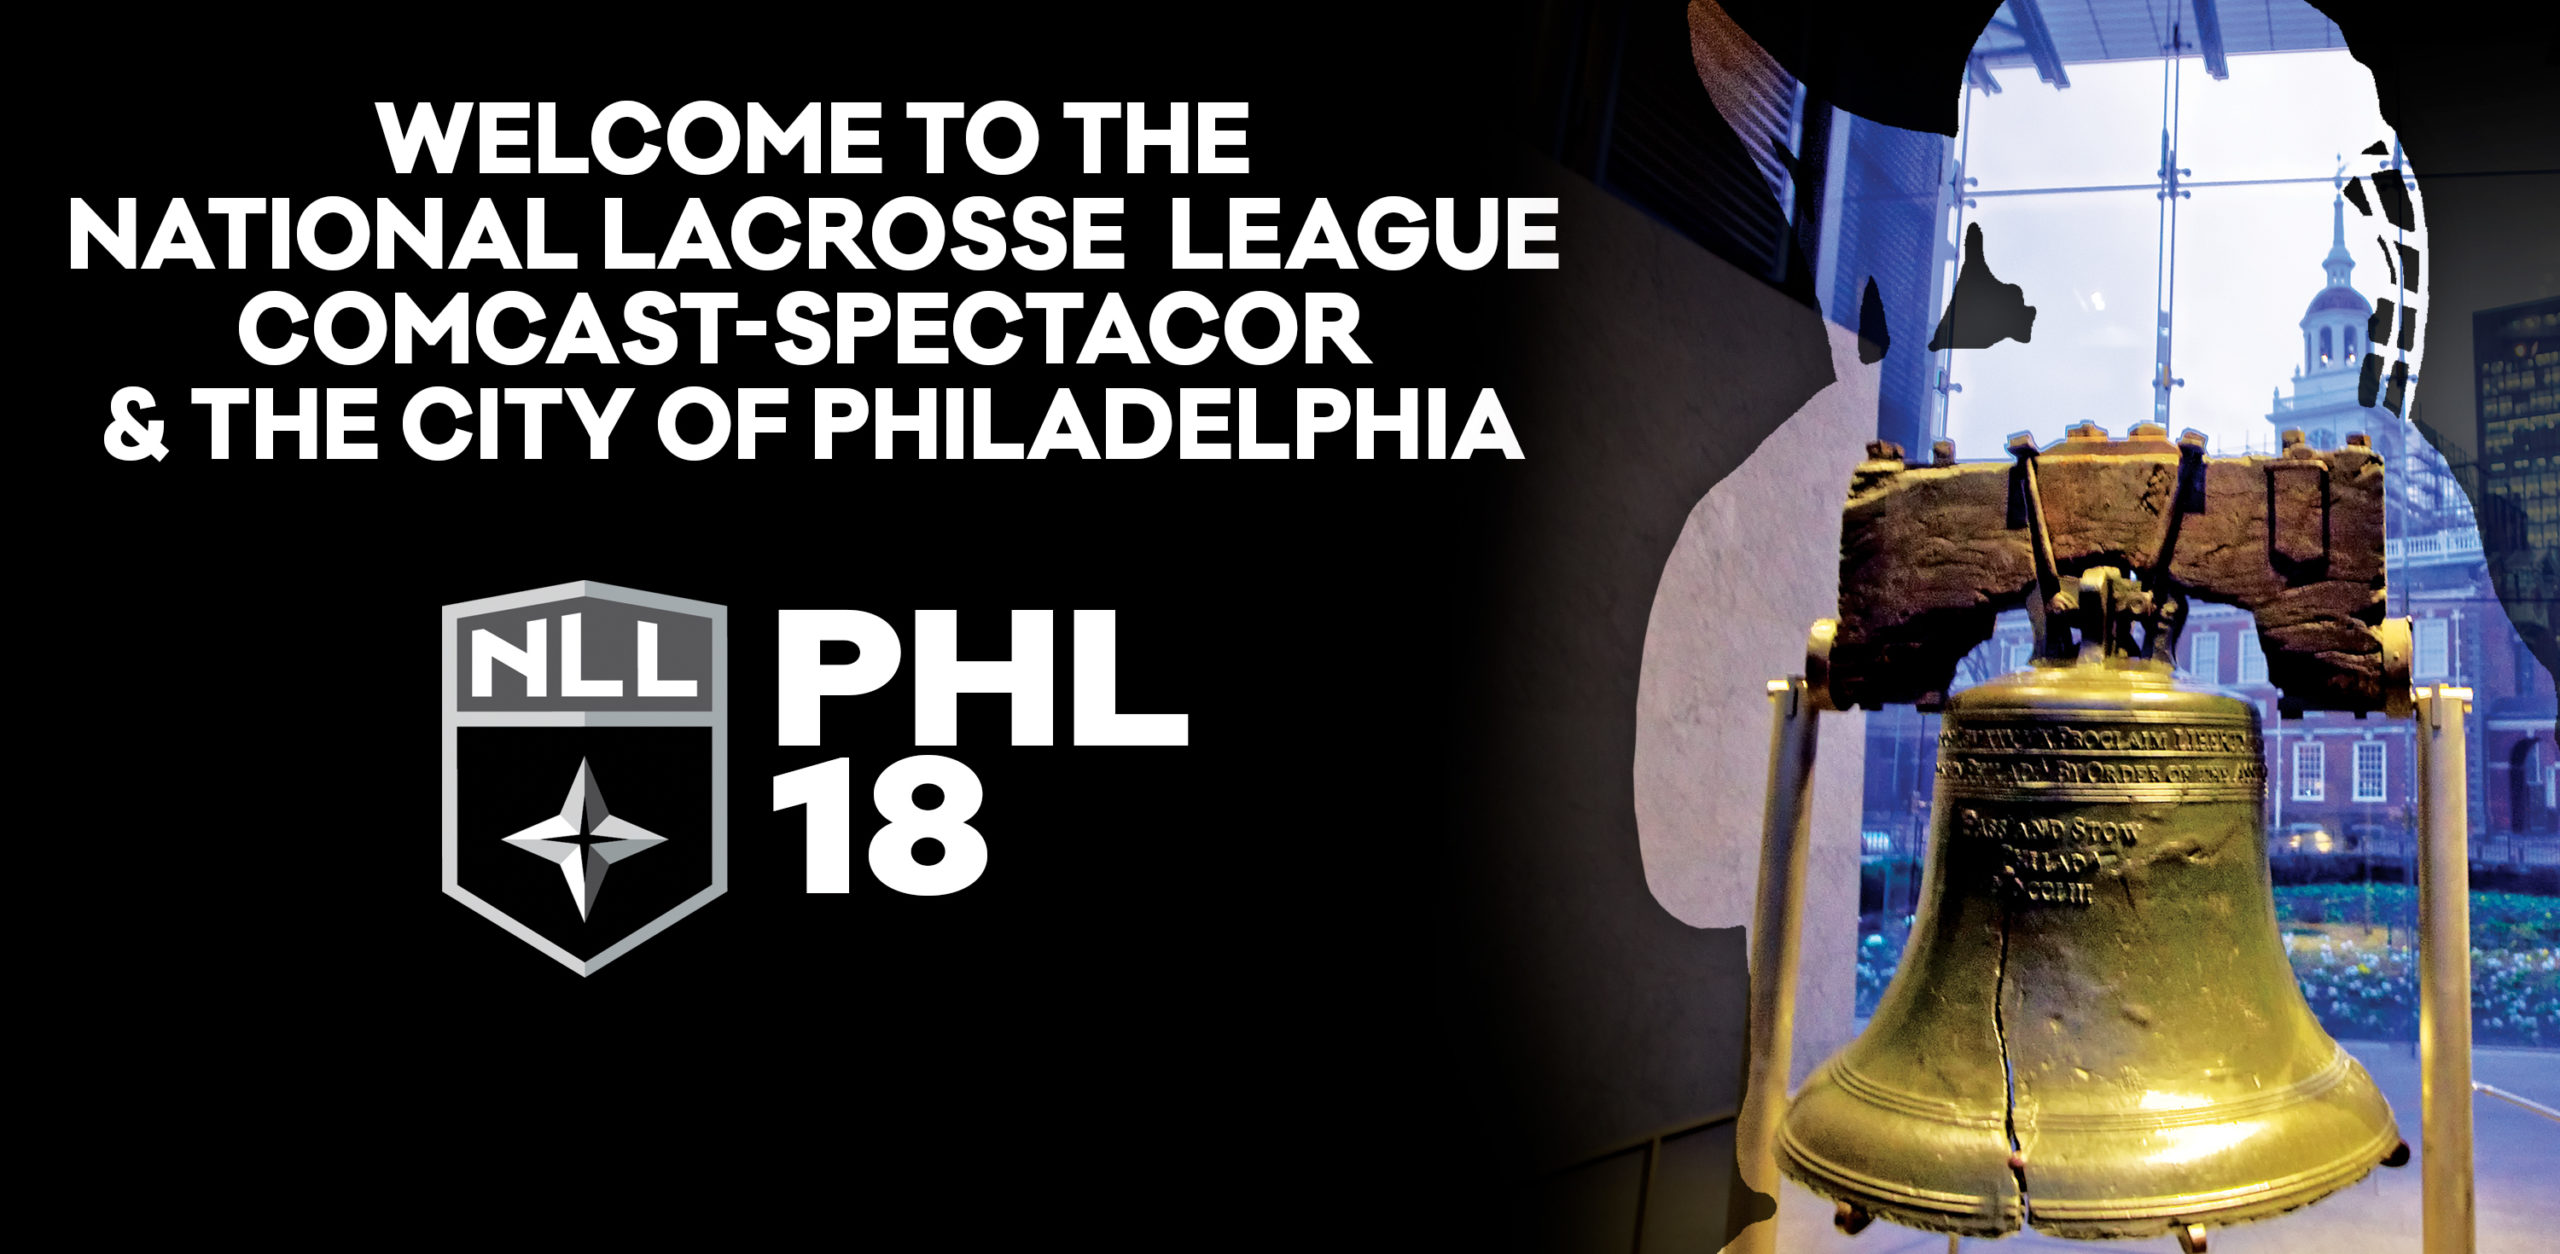 National Lacrosse League Welcomes Its 11th Franchise